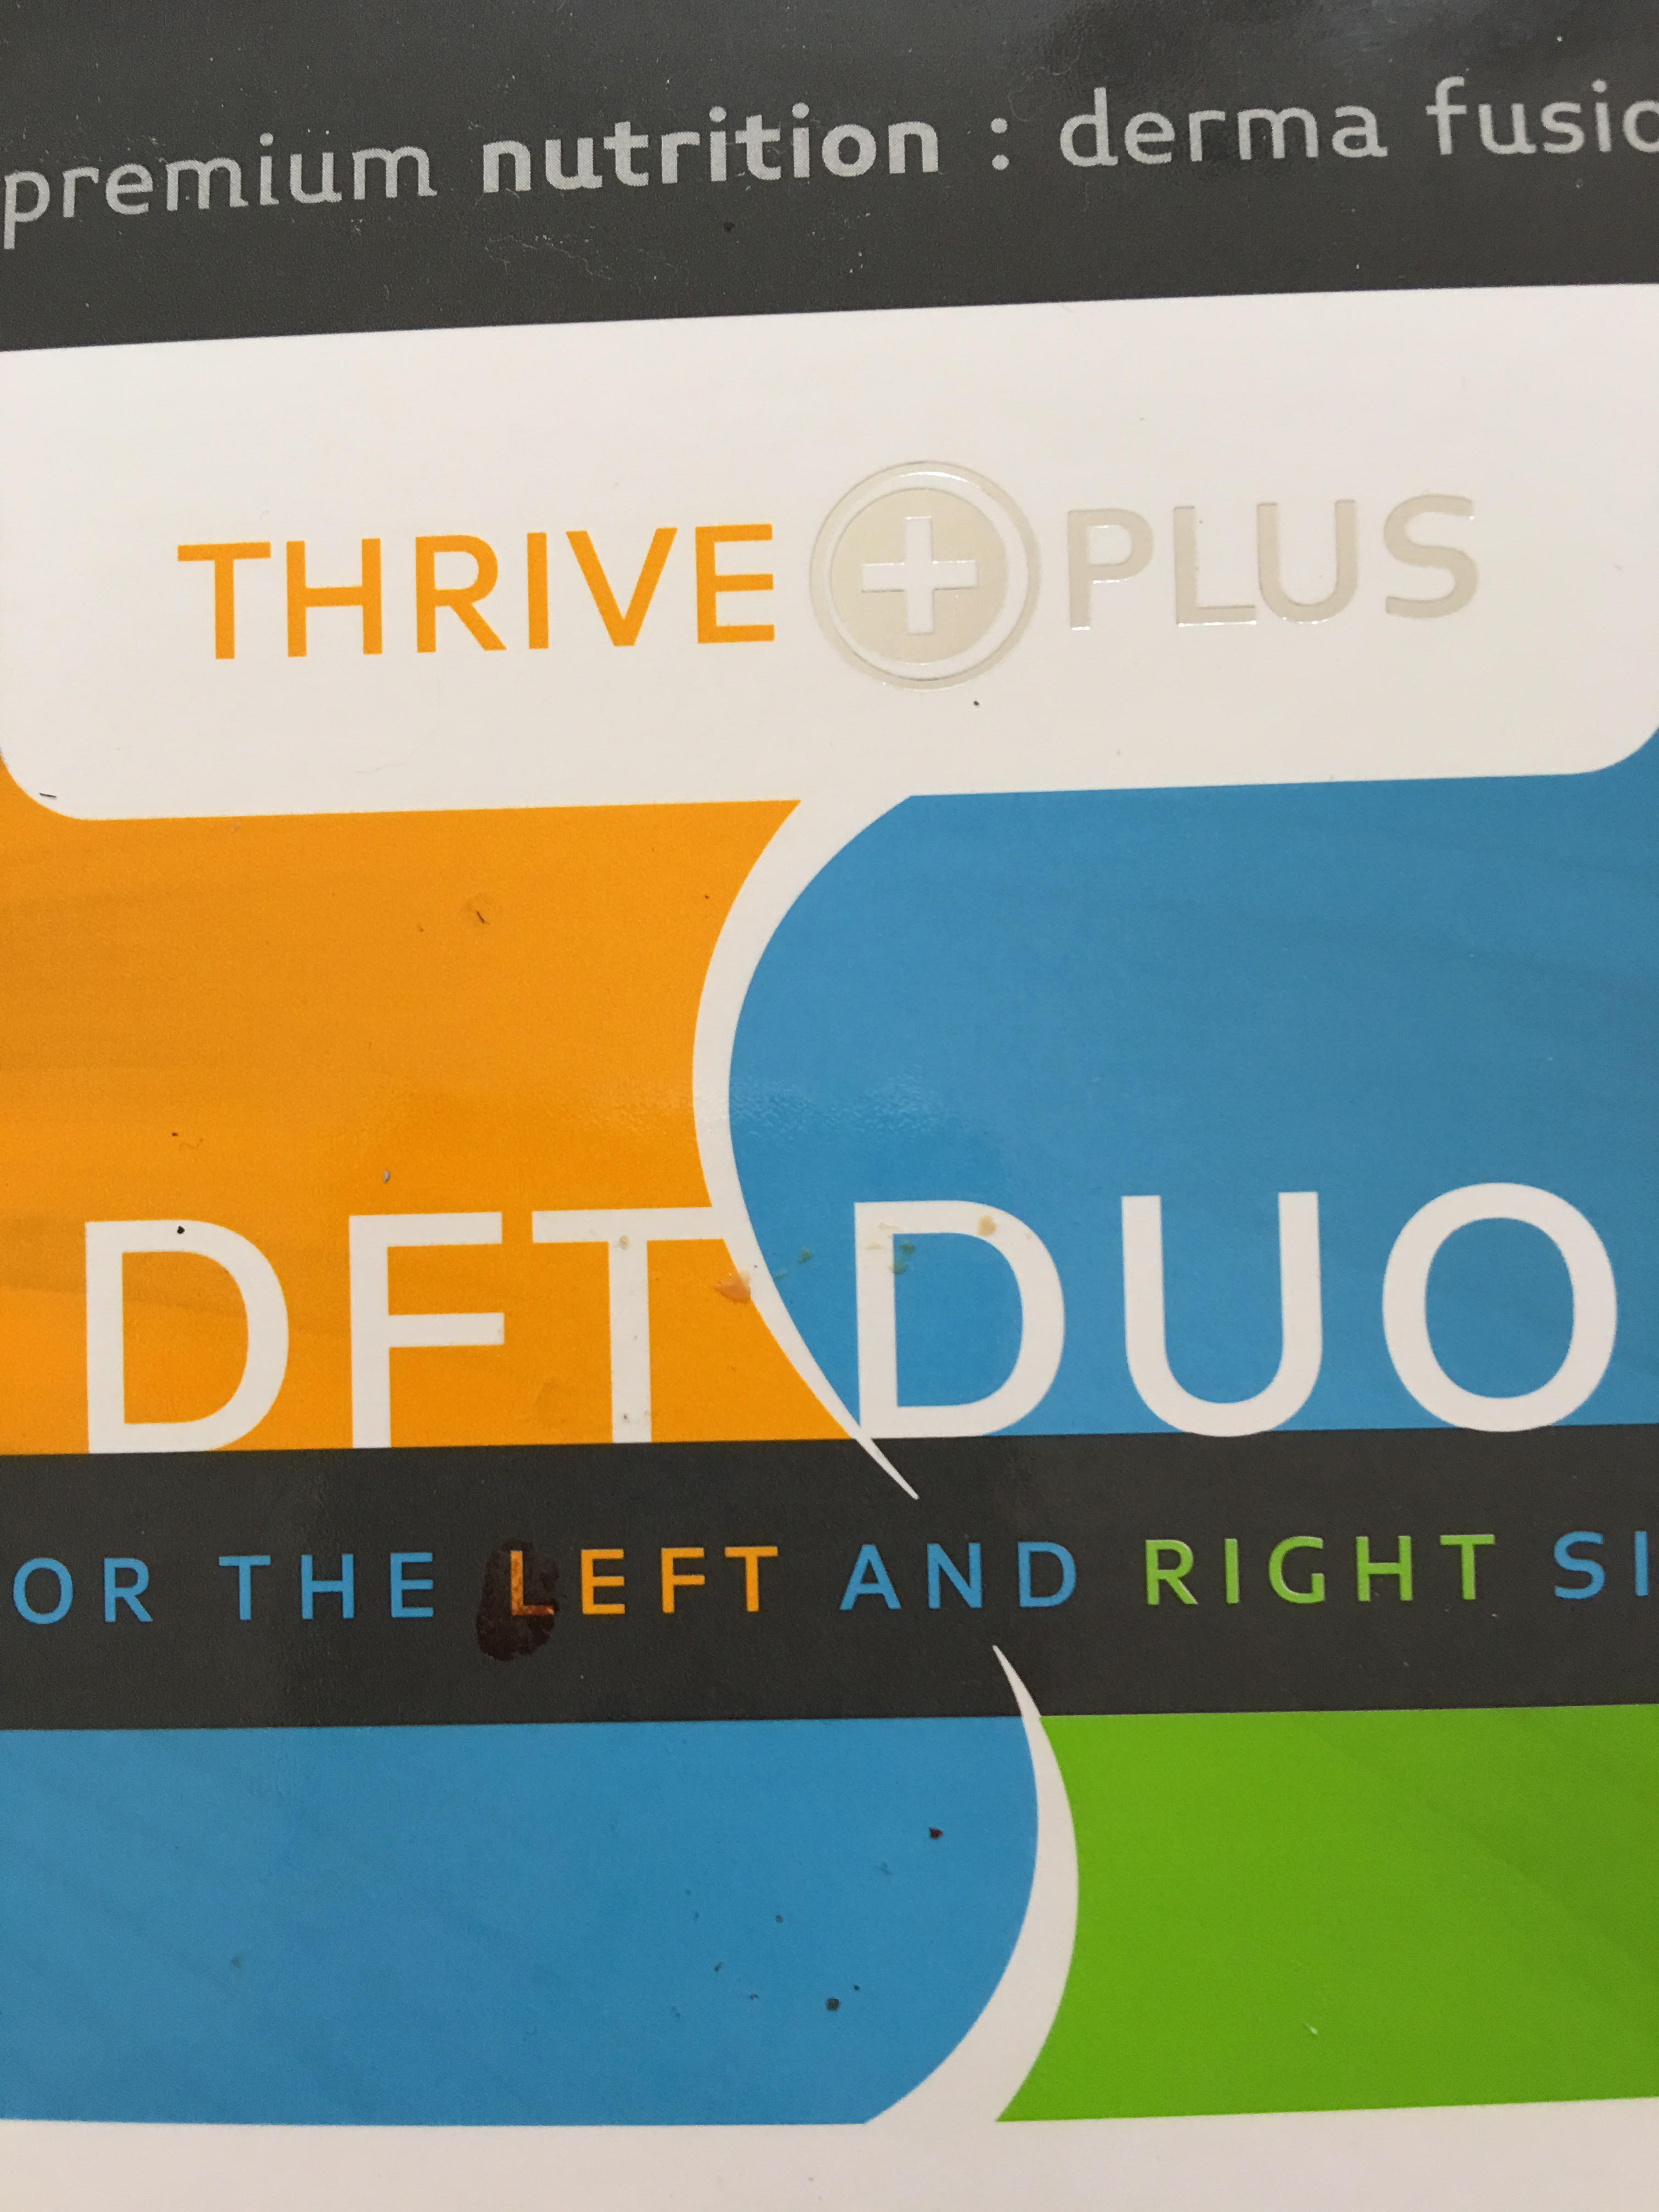 Thrive DFT DUO Weight Loss Patch: Critical Review Of ...